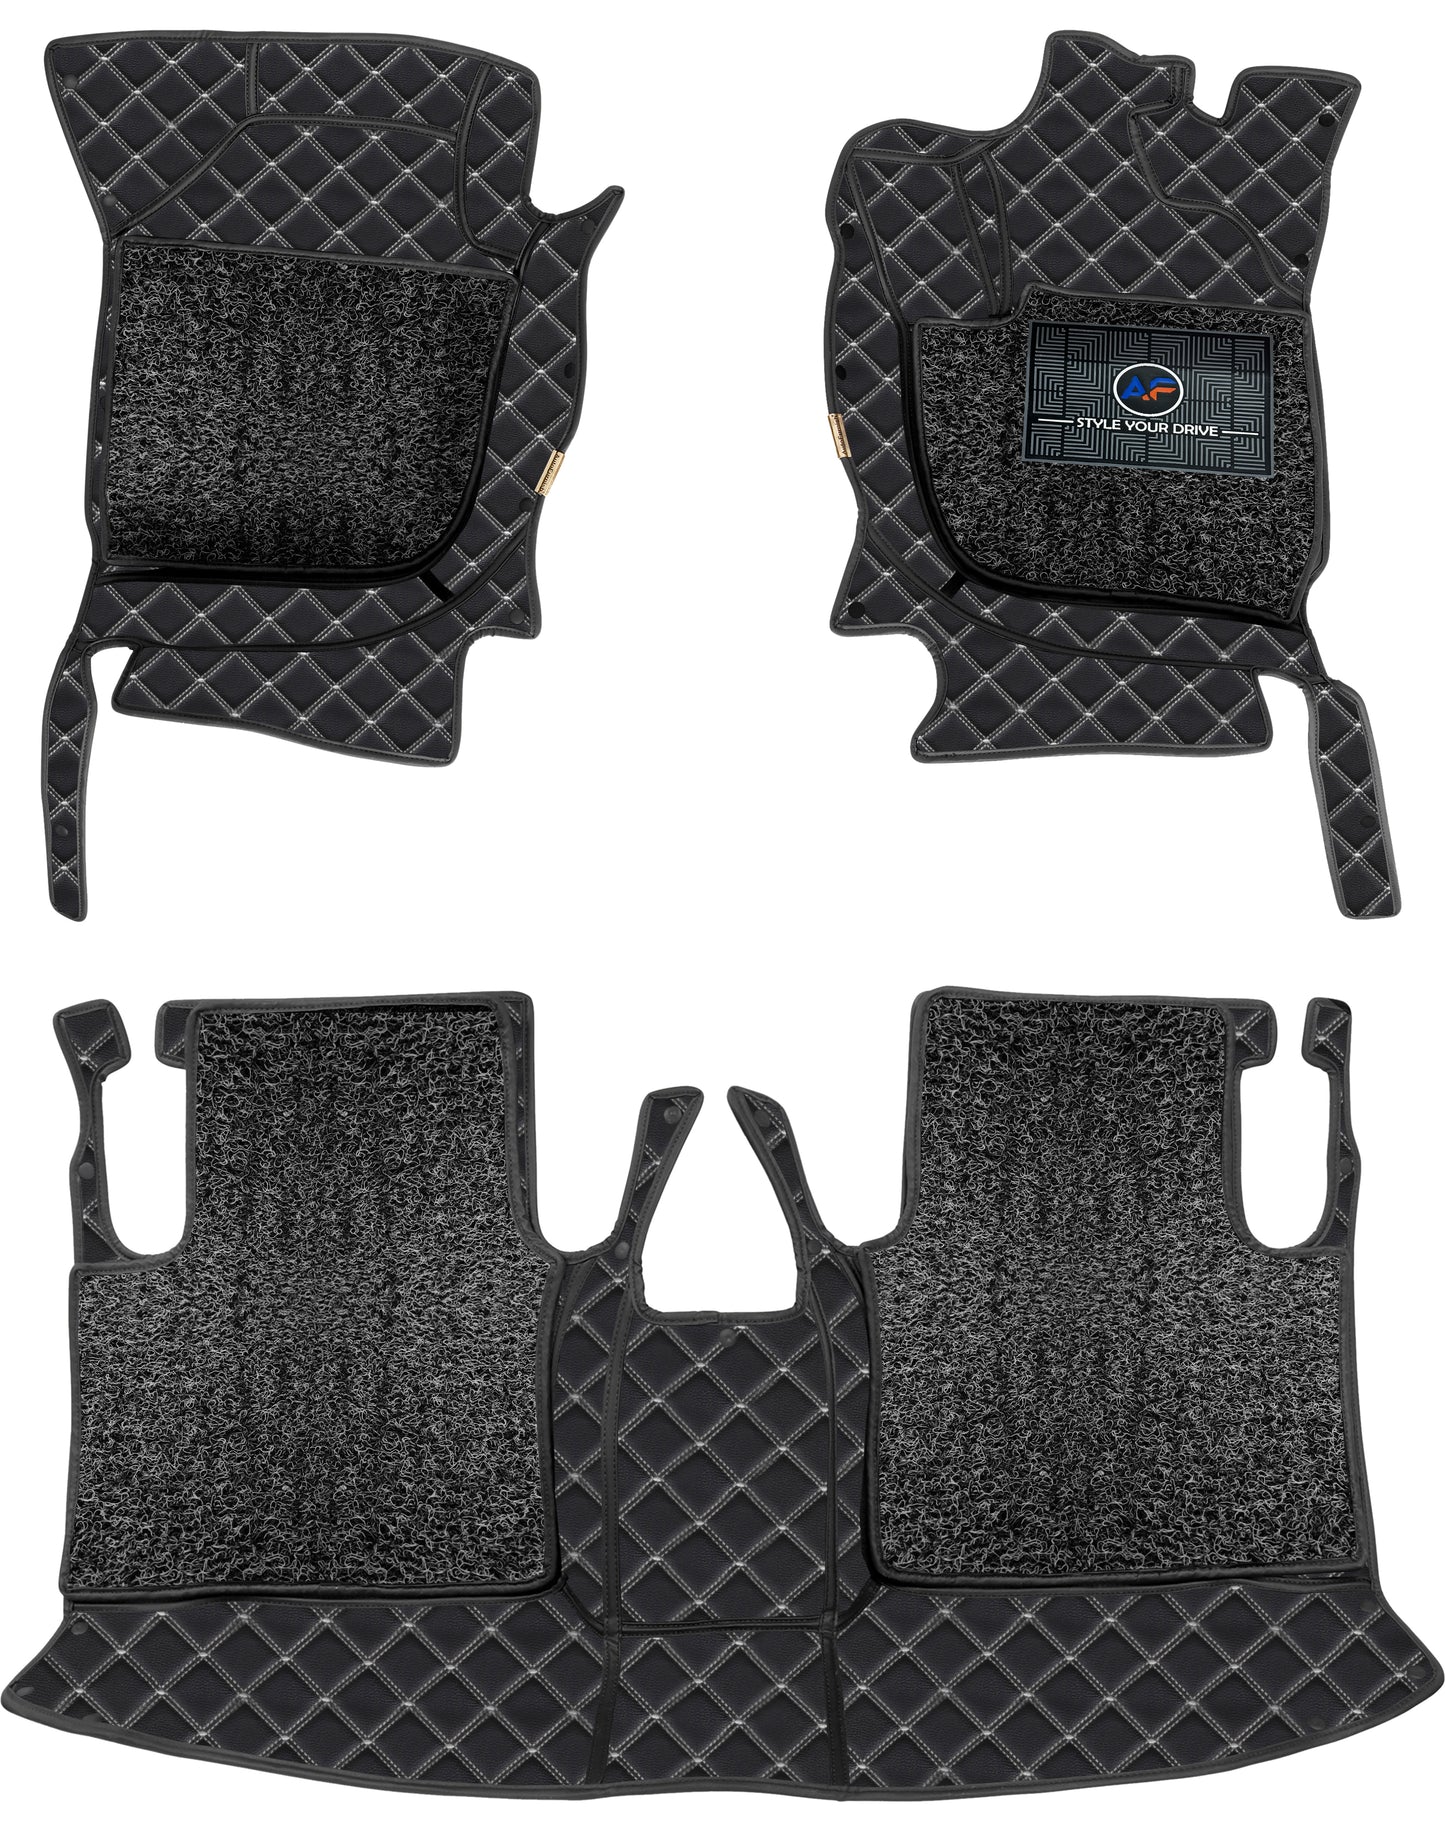 Volvo S90- 2020-7D Luxury Car Mat, All Weather Proof, Anti-Skid, 100% Waterproof & Odorless with Unique Diamond Fish Design (24mm Luxury PU Leather, 2 Rows)